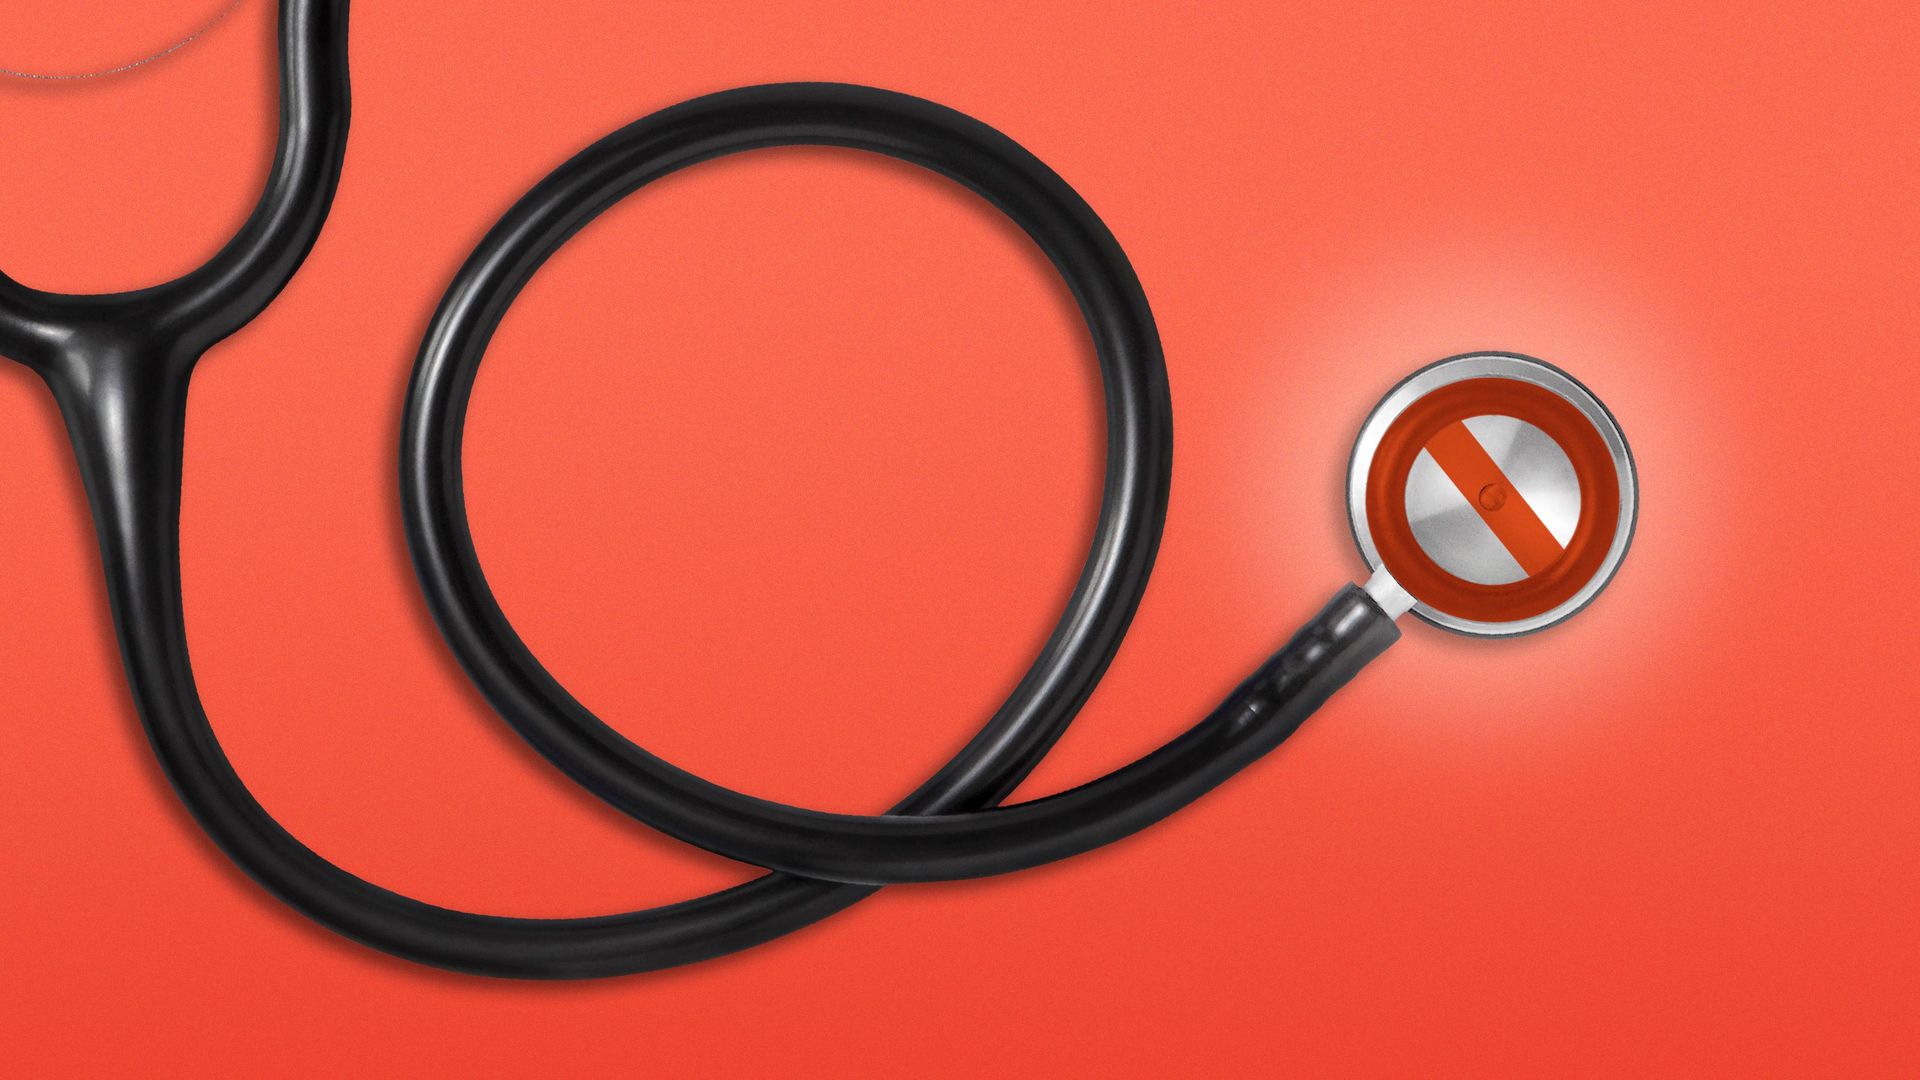 Illustration of a stethoscope with a "no" symbol on the bell/diaphragm.